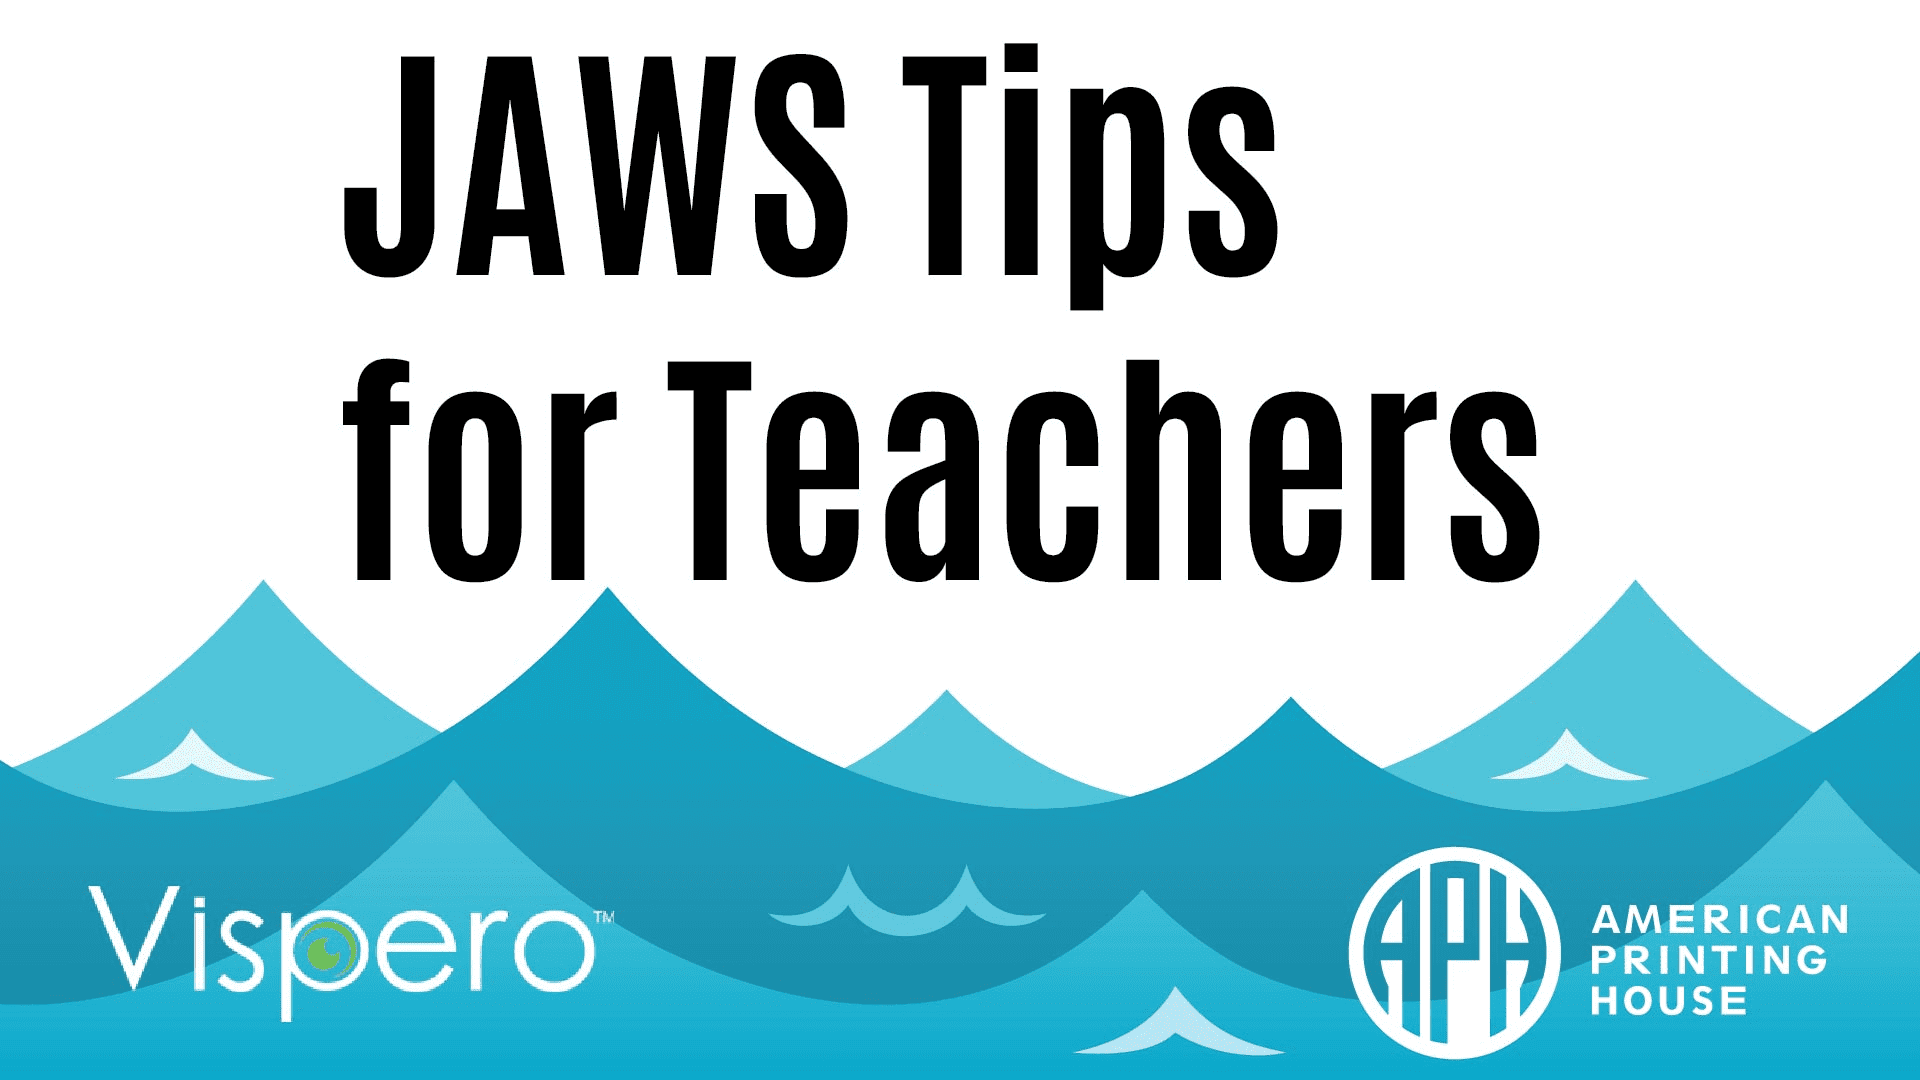 Ocean waves with the Vispero logo and APH logo overlaid in the bottom corners. Text: JAWS Tips for Teachers